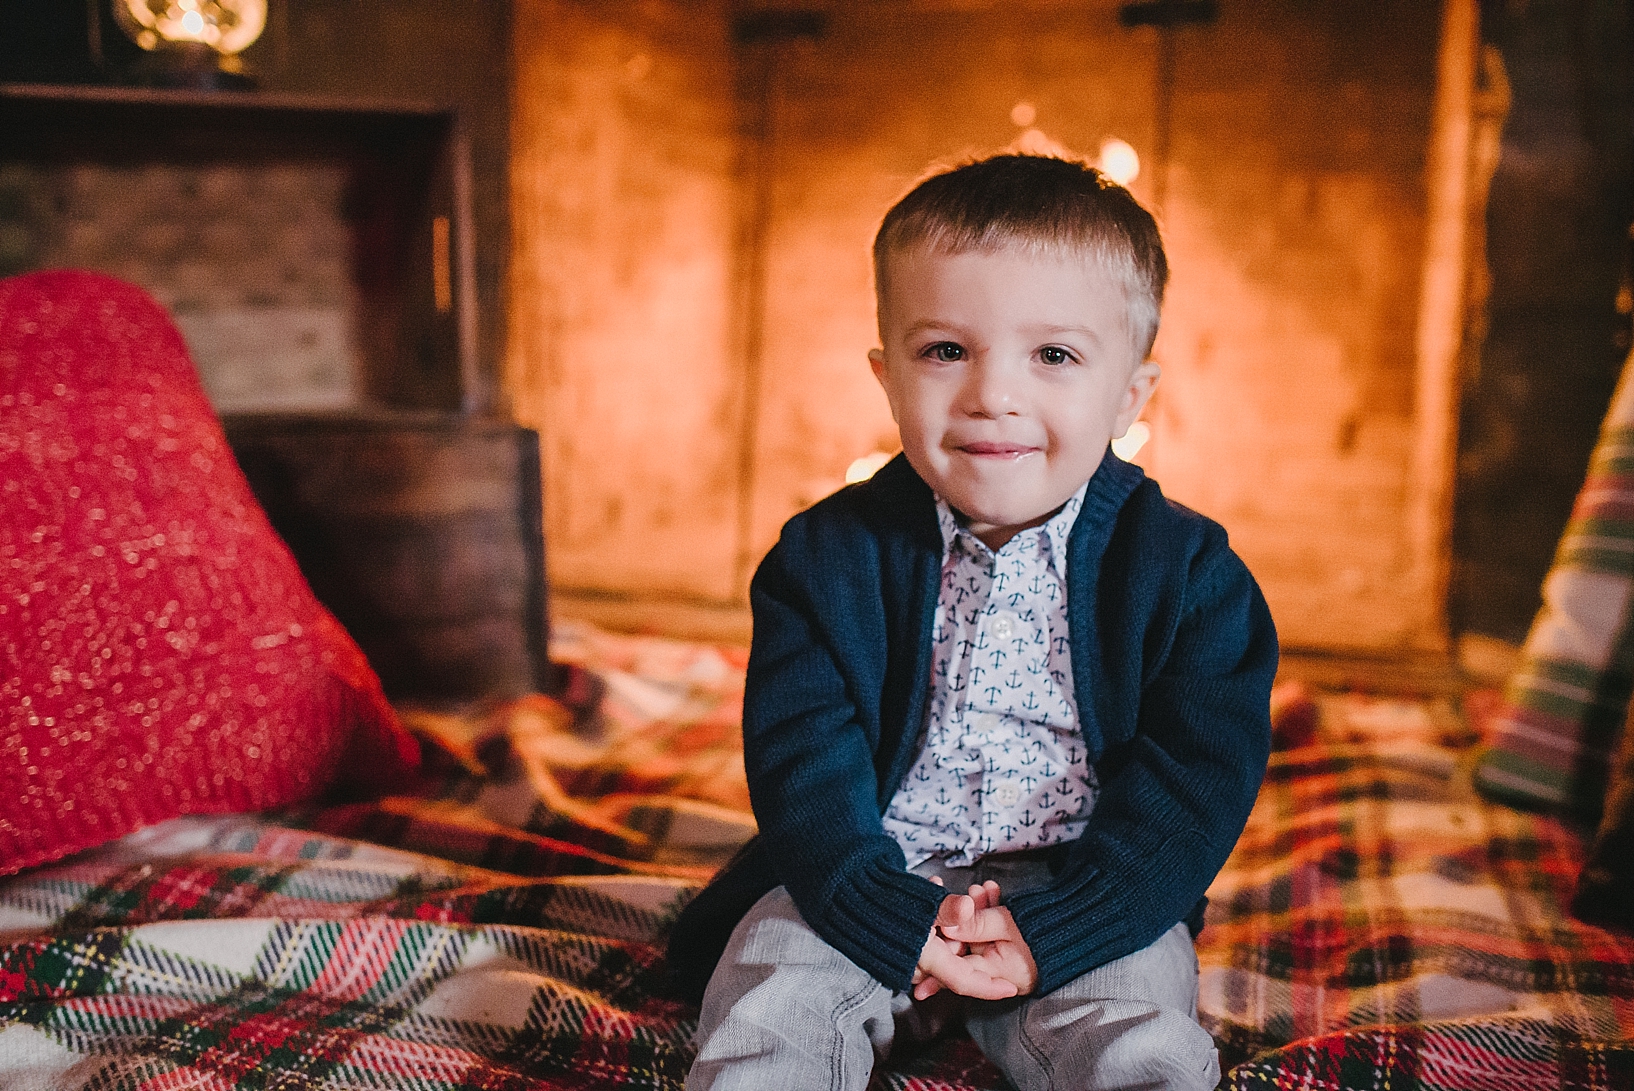 little boy in navy blue cardigan and button down dress shirt sitting in front of crackling fireplace on plaid blanket with hands in his lap